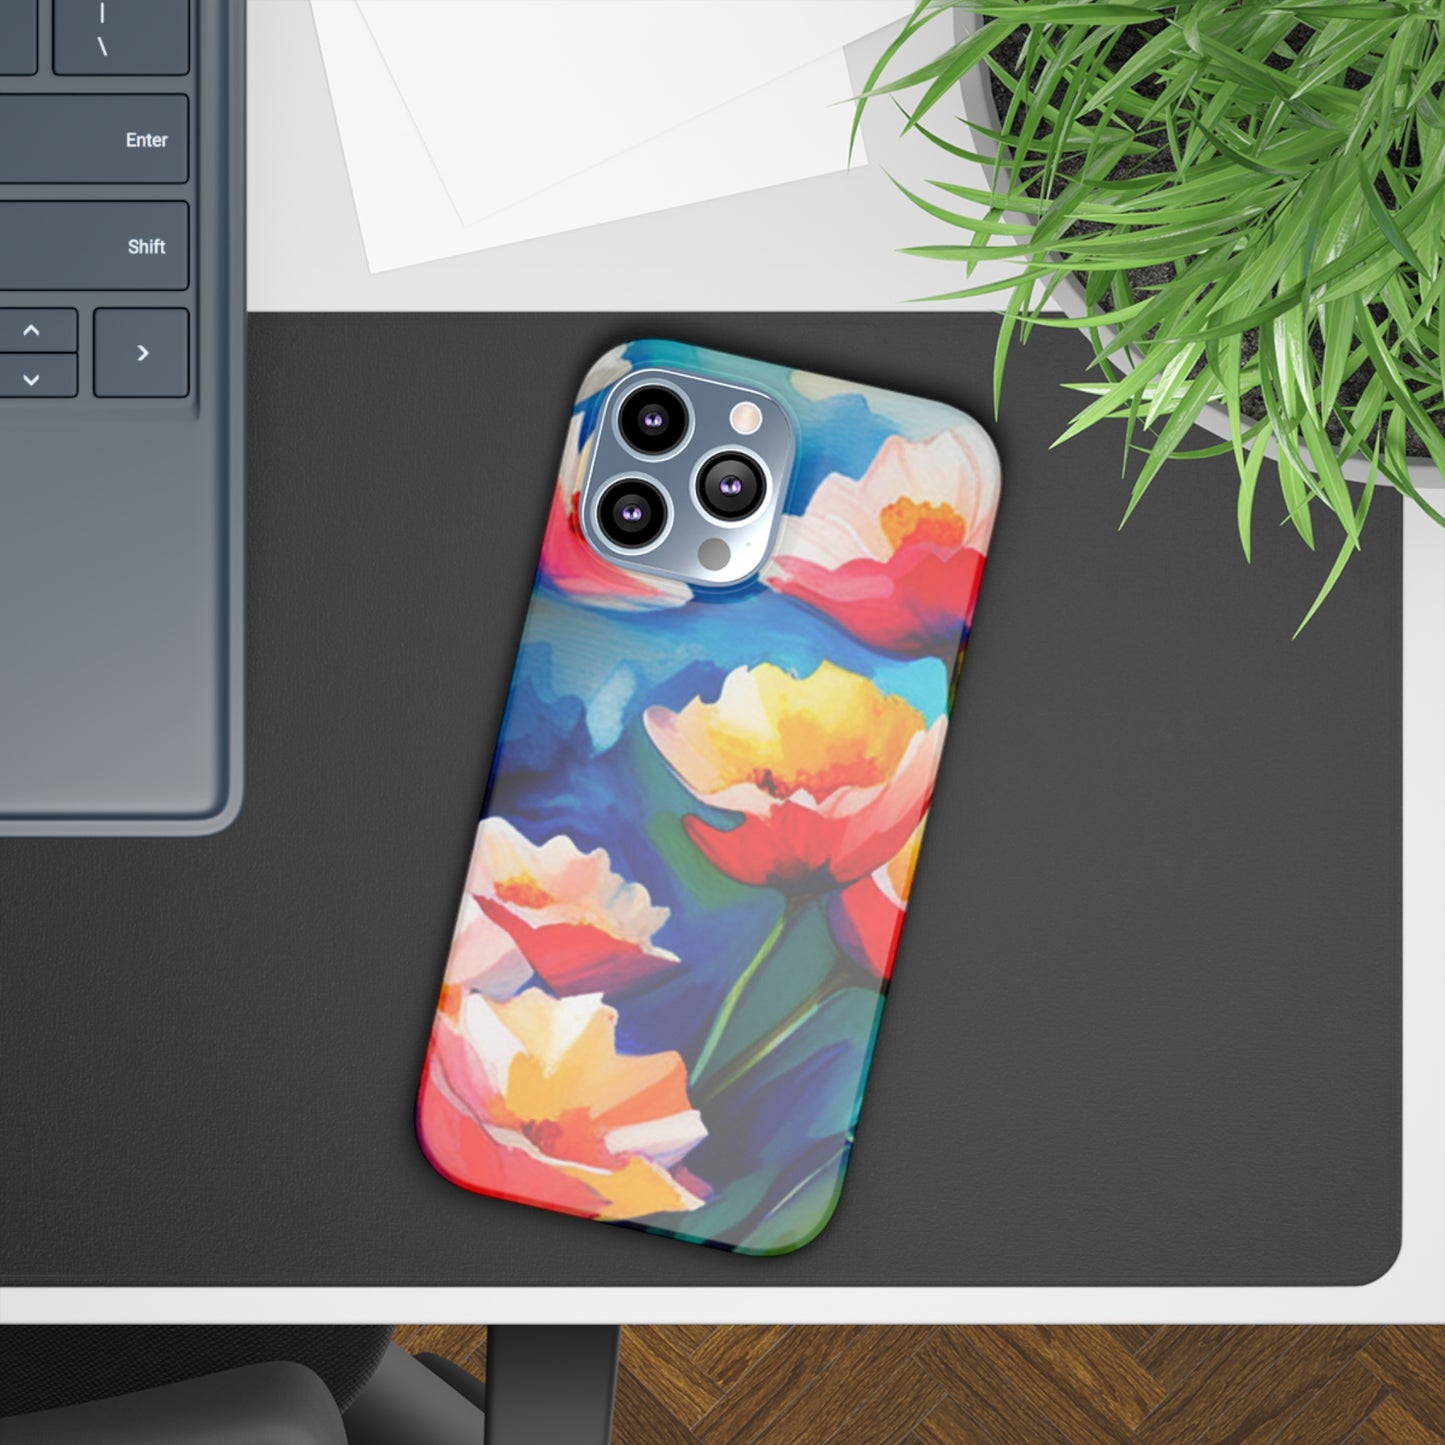 Floral Slim Cases for iPhone and Samsung Galaxy Phones iPhone 13  12 Pro Max Samsung Galaxy S21 Phone Cases